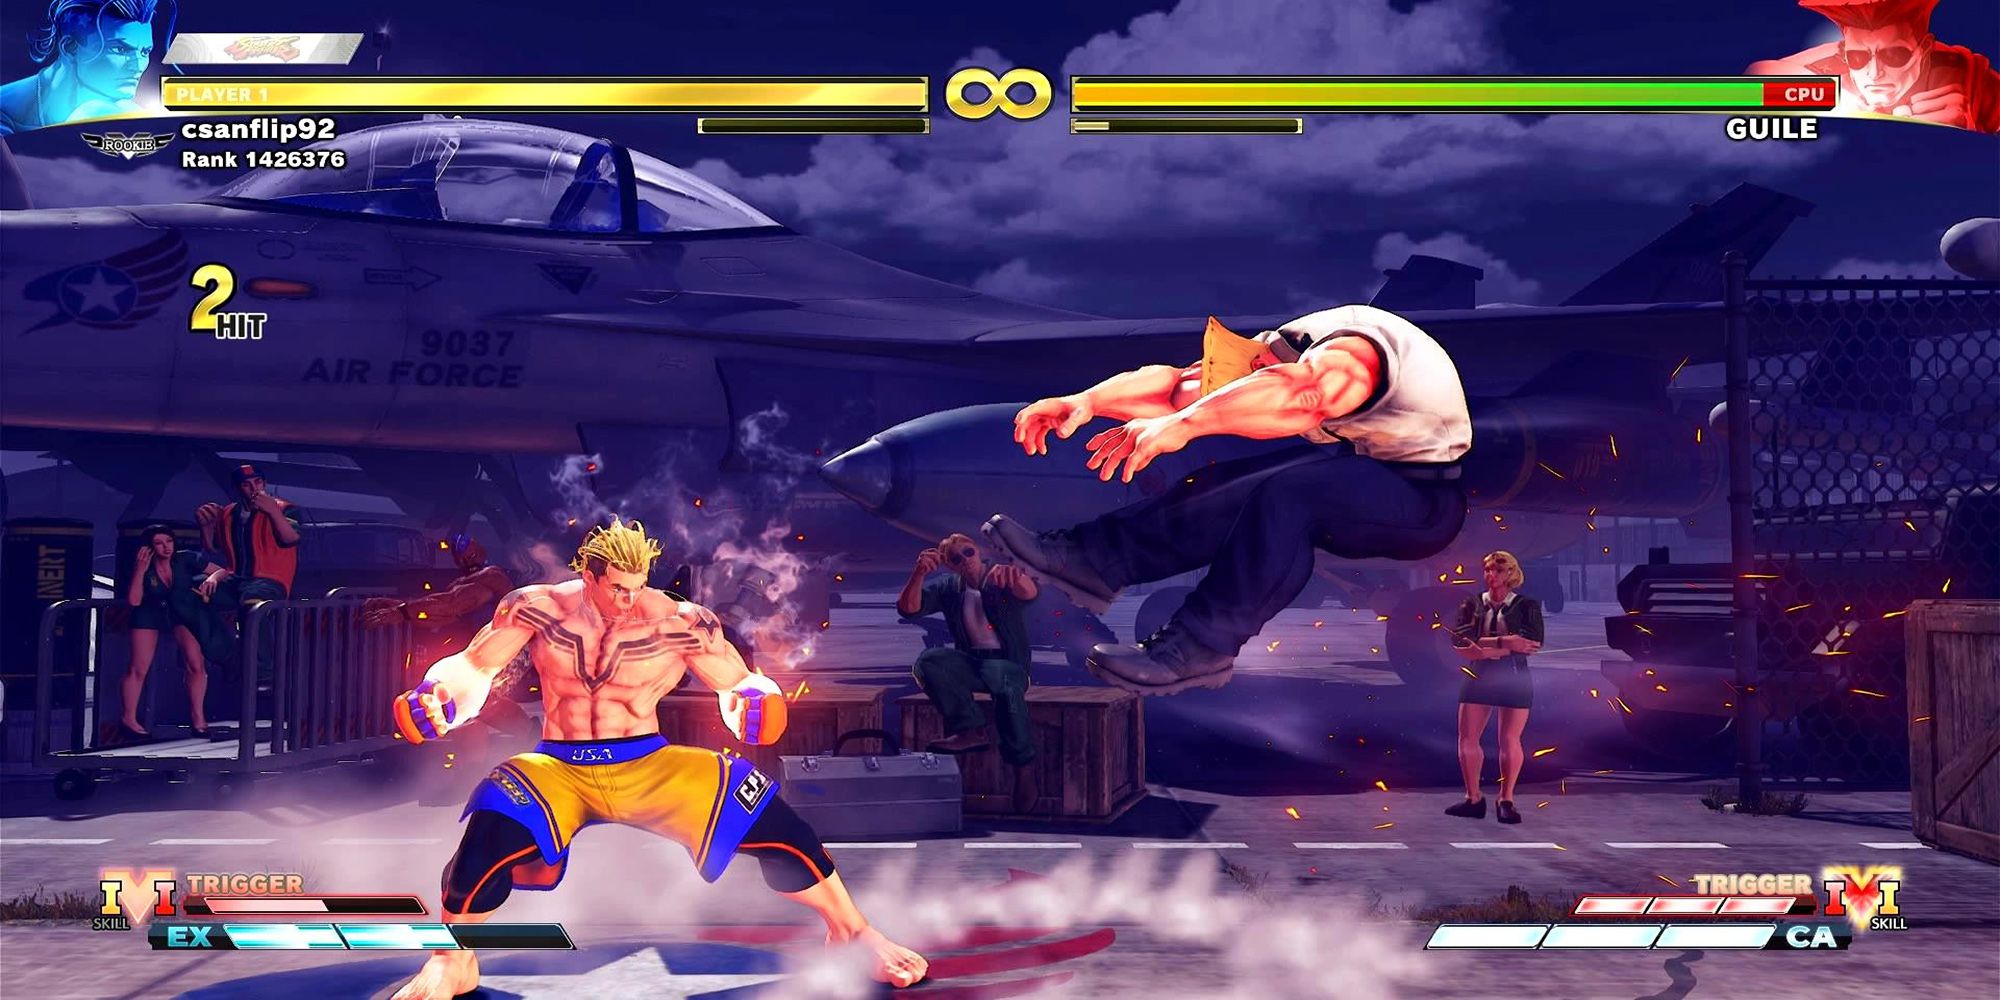 Luke hits Guile with his Thermobaric Thrash in a battle at the air field in Street Fighter 5: Champion Edition.